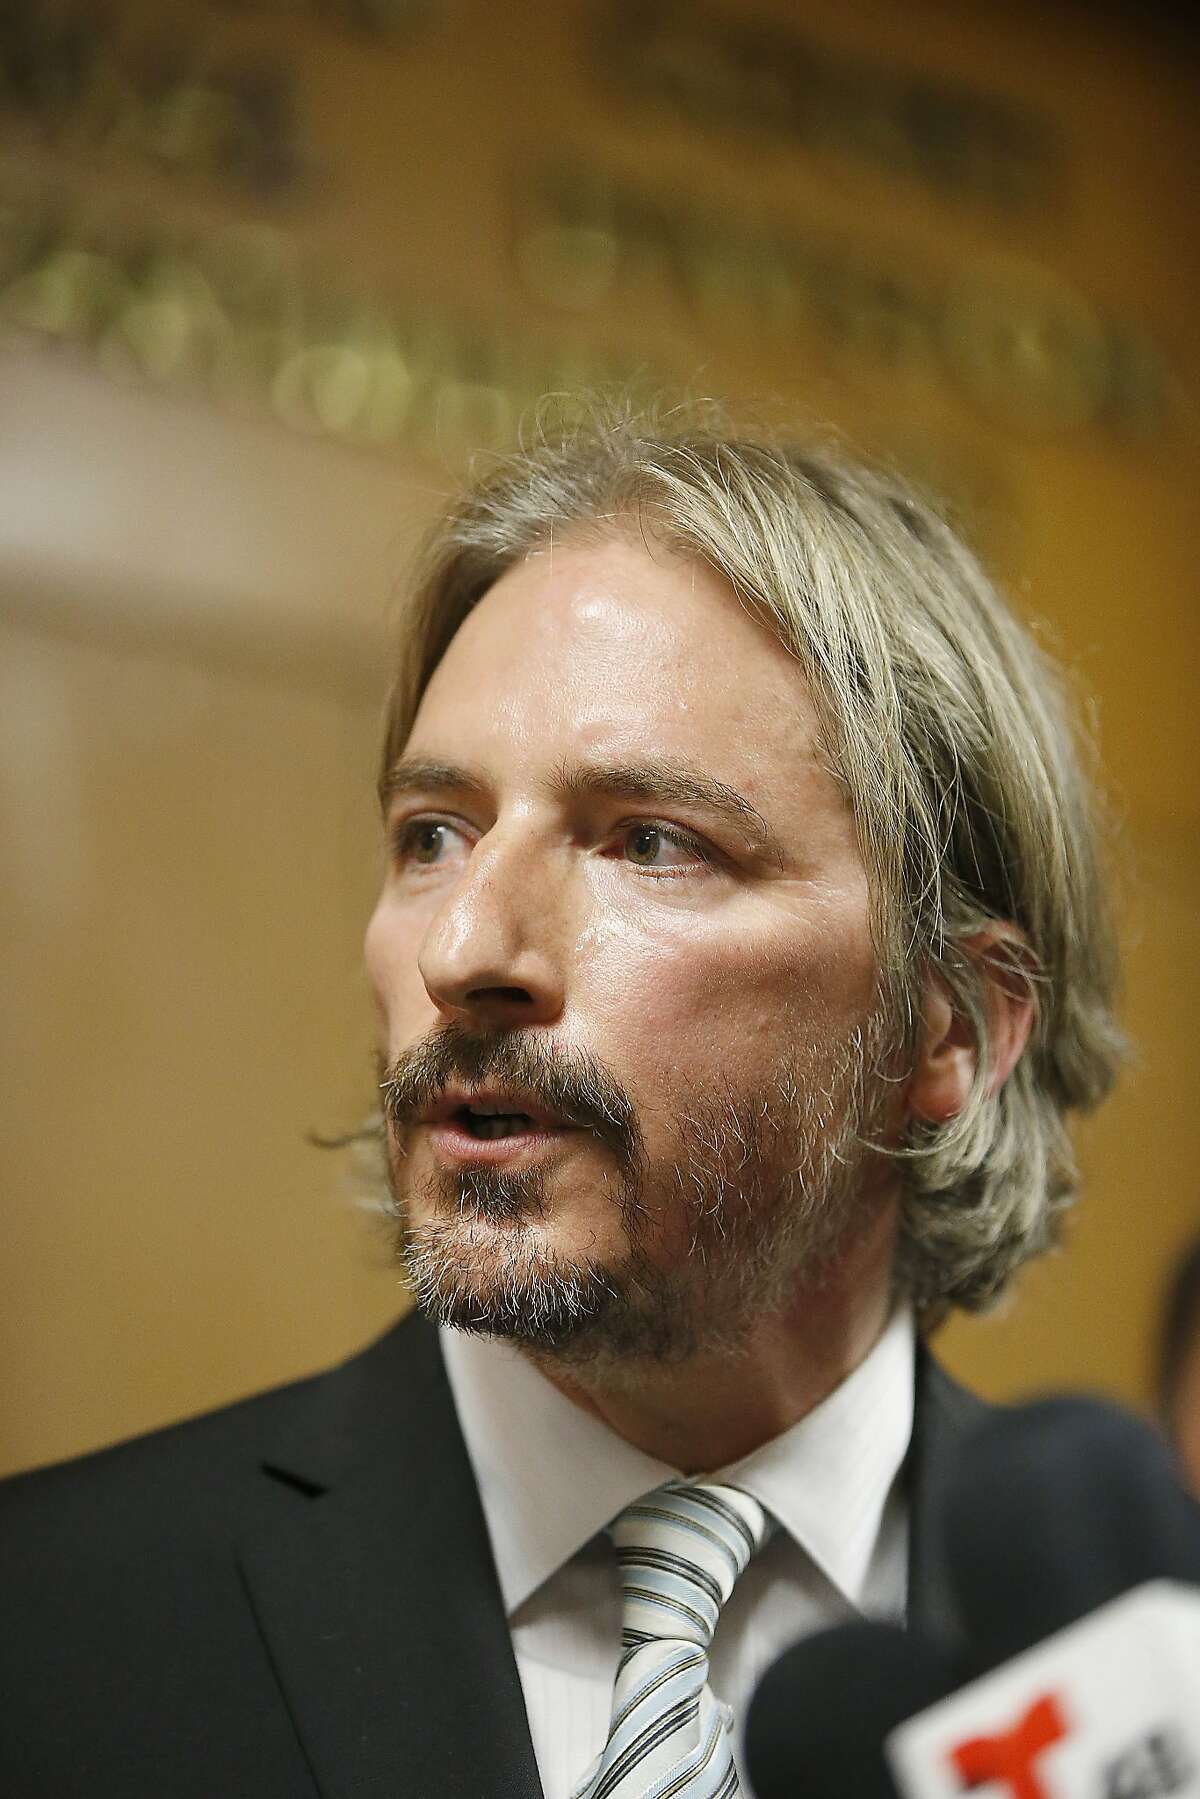 San Francisco Public Defender Matt Gonzalez talks to members of the media after Francisco Sanchez' arraignment Tuesday, July 7, 2015, in San Francisco. Prosecutors have charged Sanchez, a Mexican immigrant, with murder in the waterfront shooting death of 32-year-old Kathryn Steinle. (AP Photo/Tony Avelar)